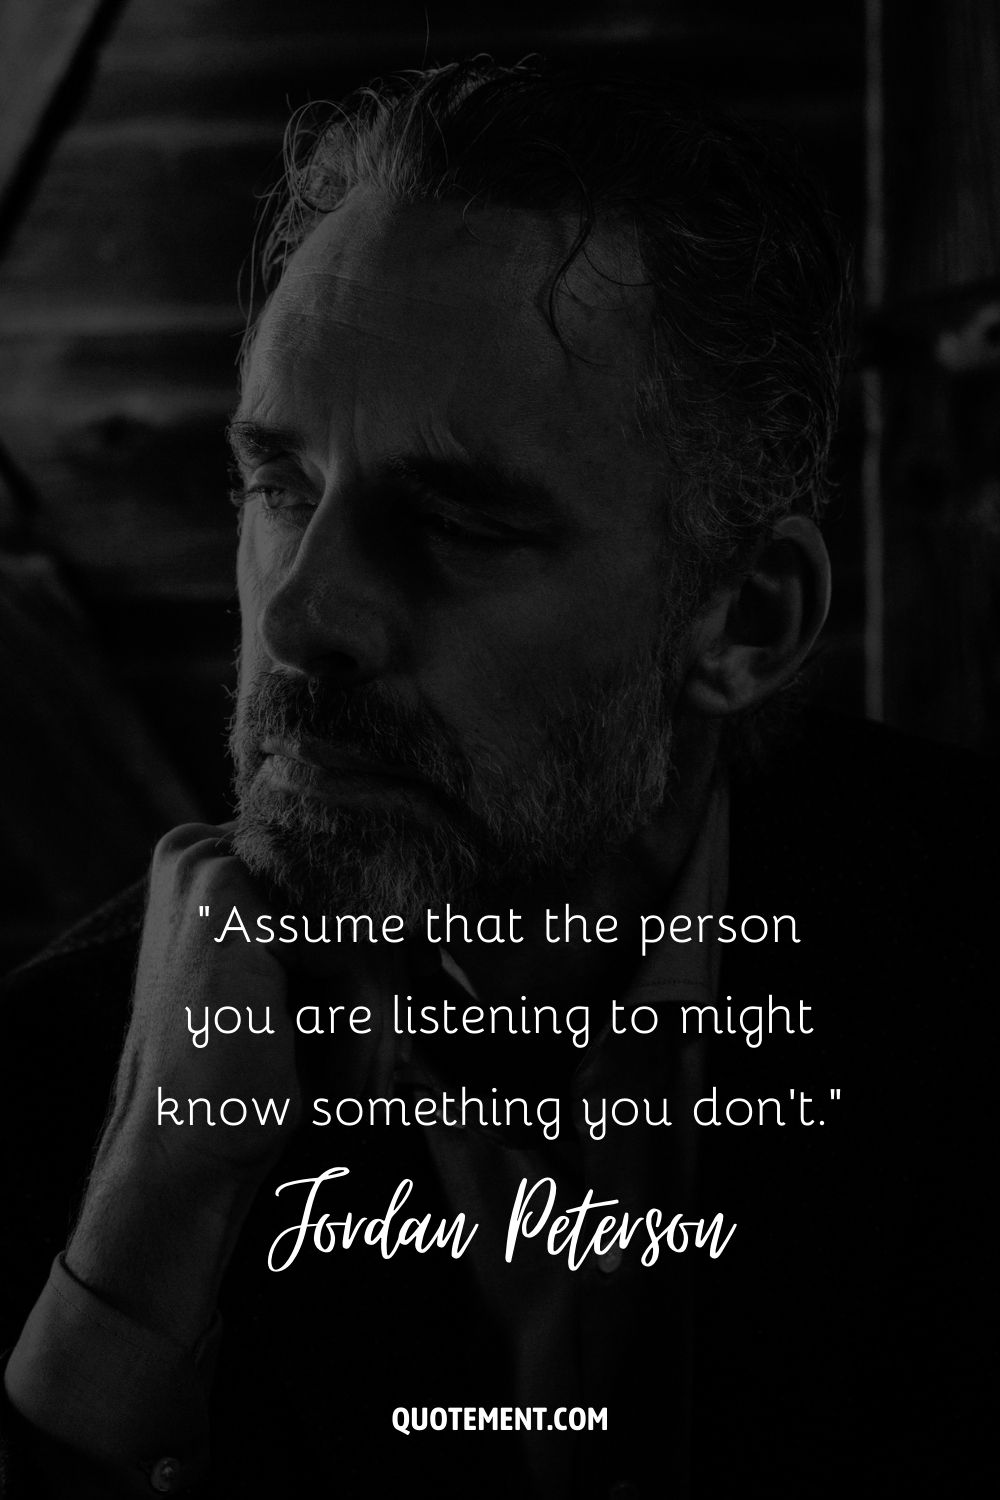 Jordan Peterson quote about listening to people.